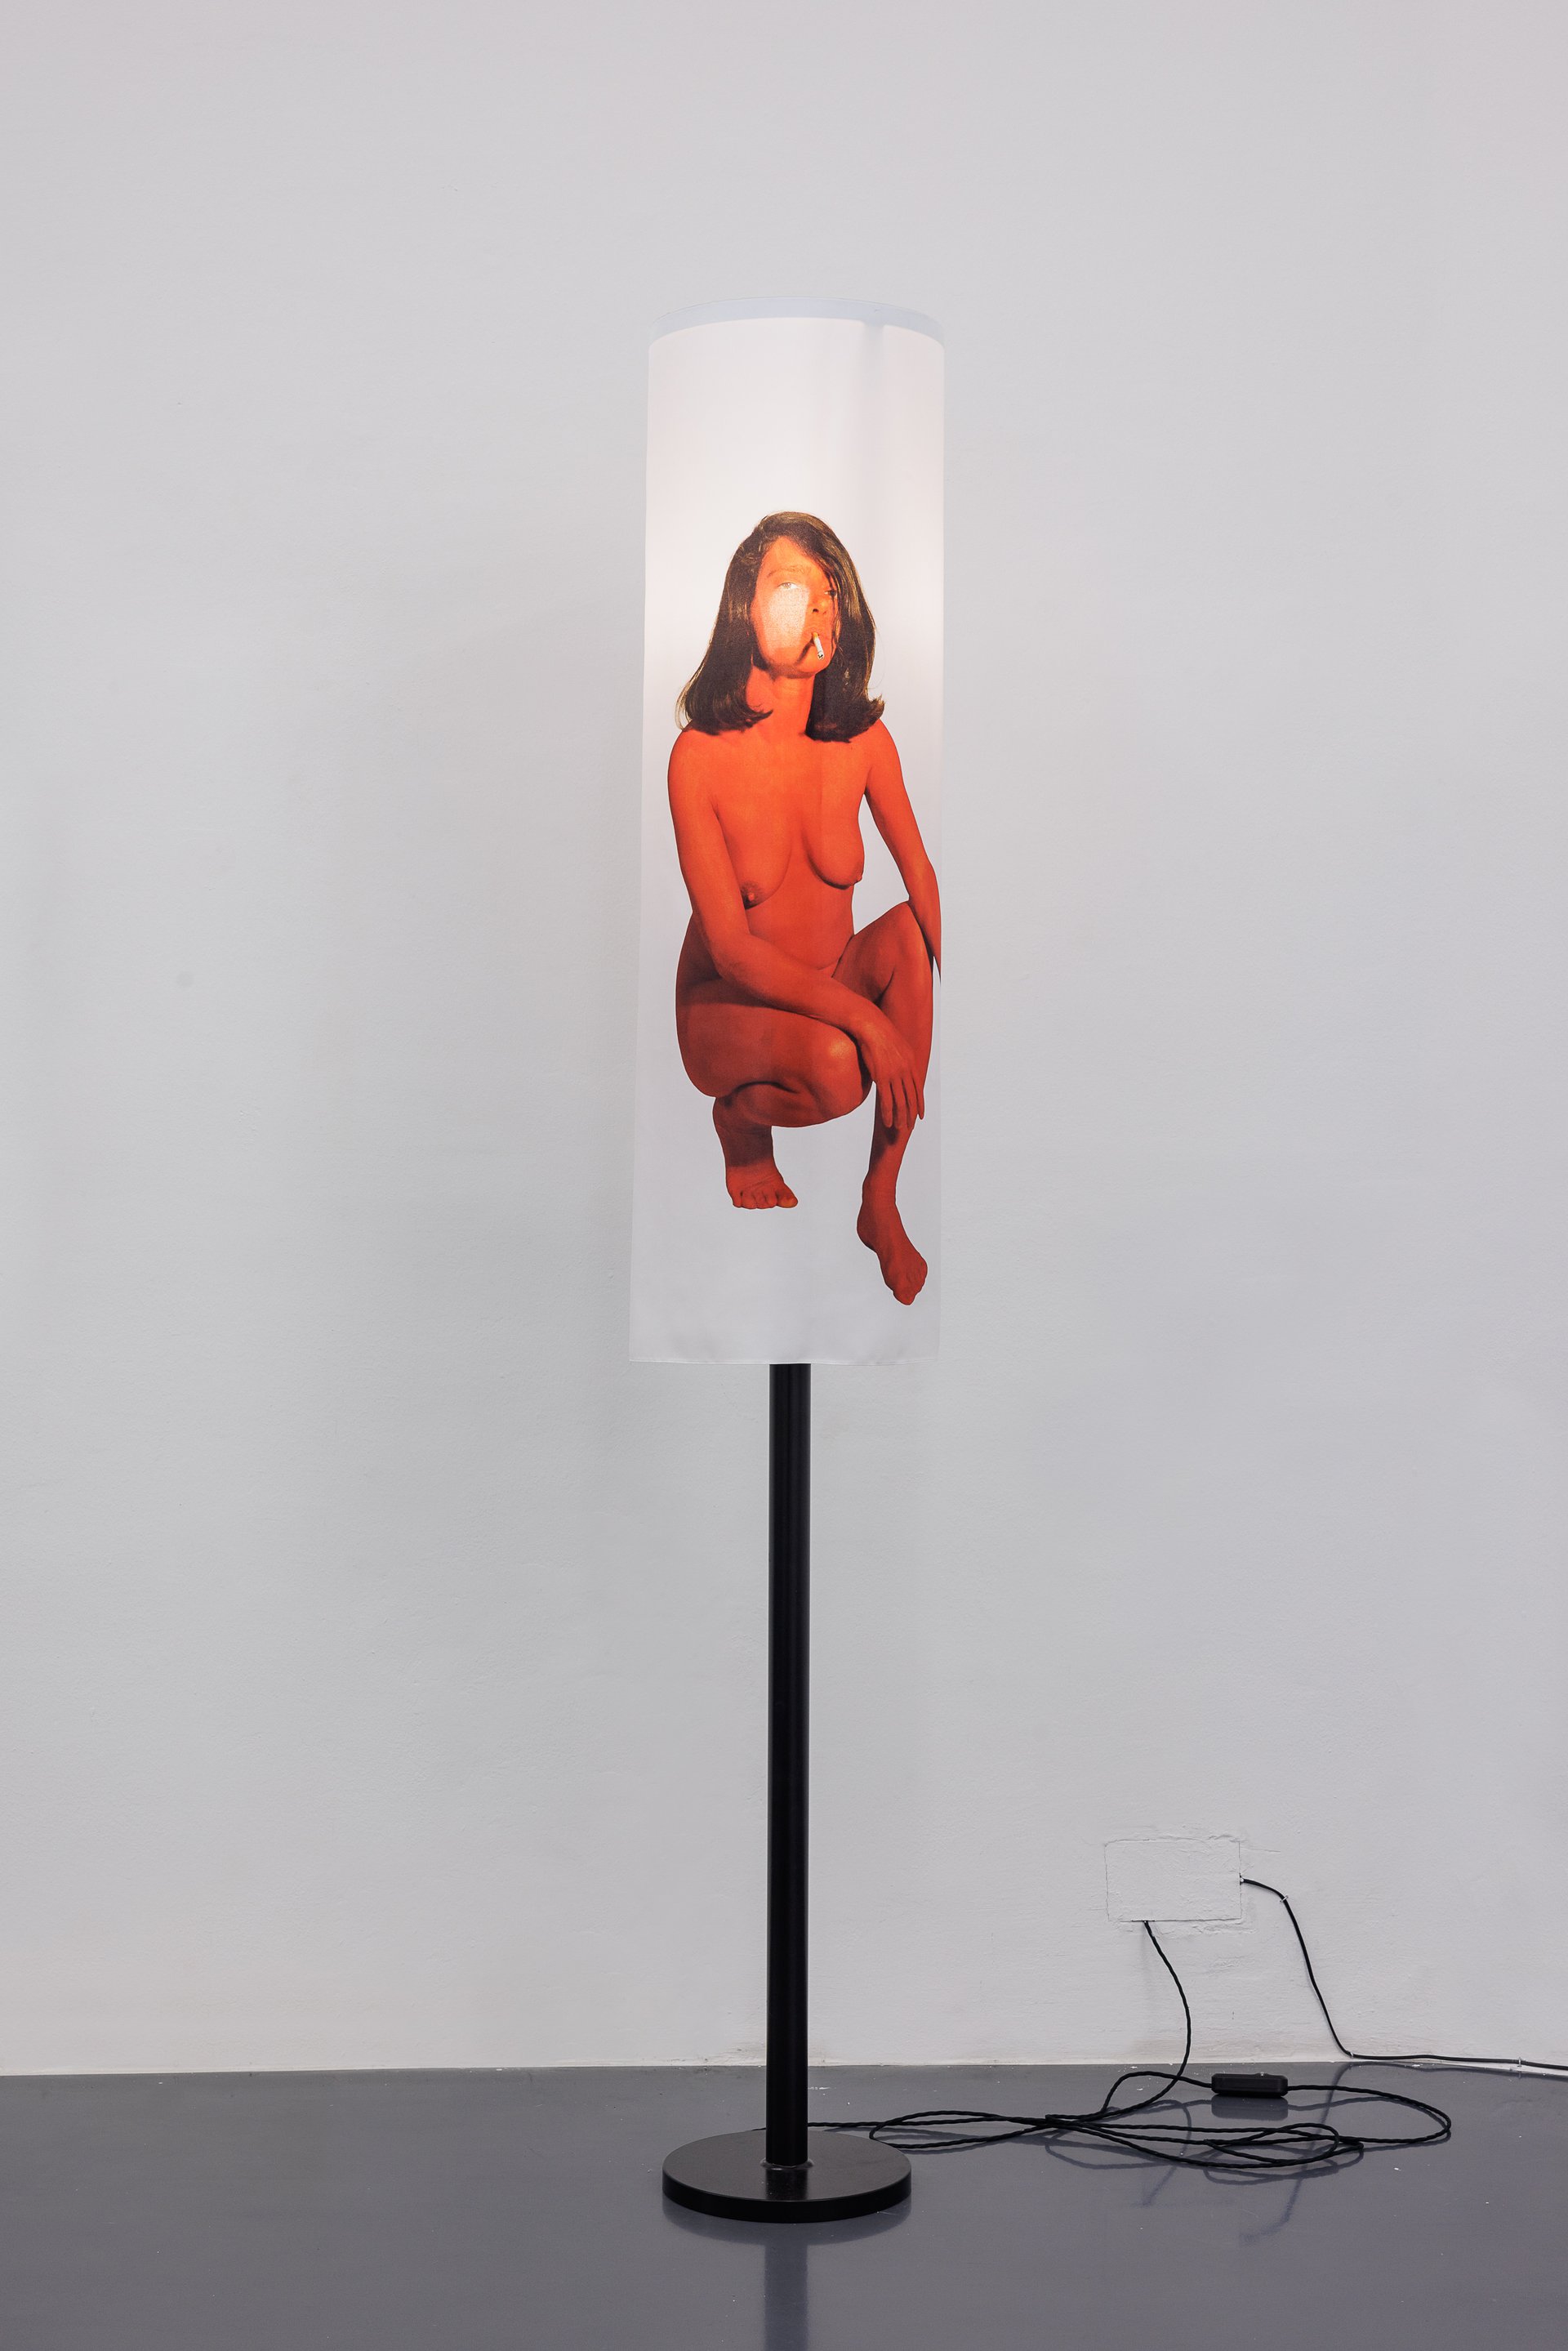 Lili Reynaud-DewarI invited men into my hotel room and asked them very personal questions about their lives, 2022Lacquered metal, printed silk, light bulb214.5 x 30 (d) cm